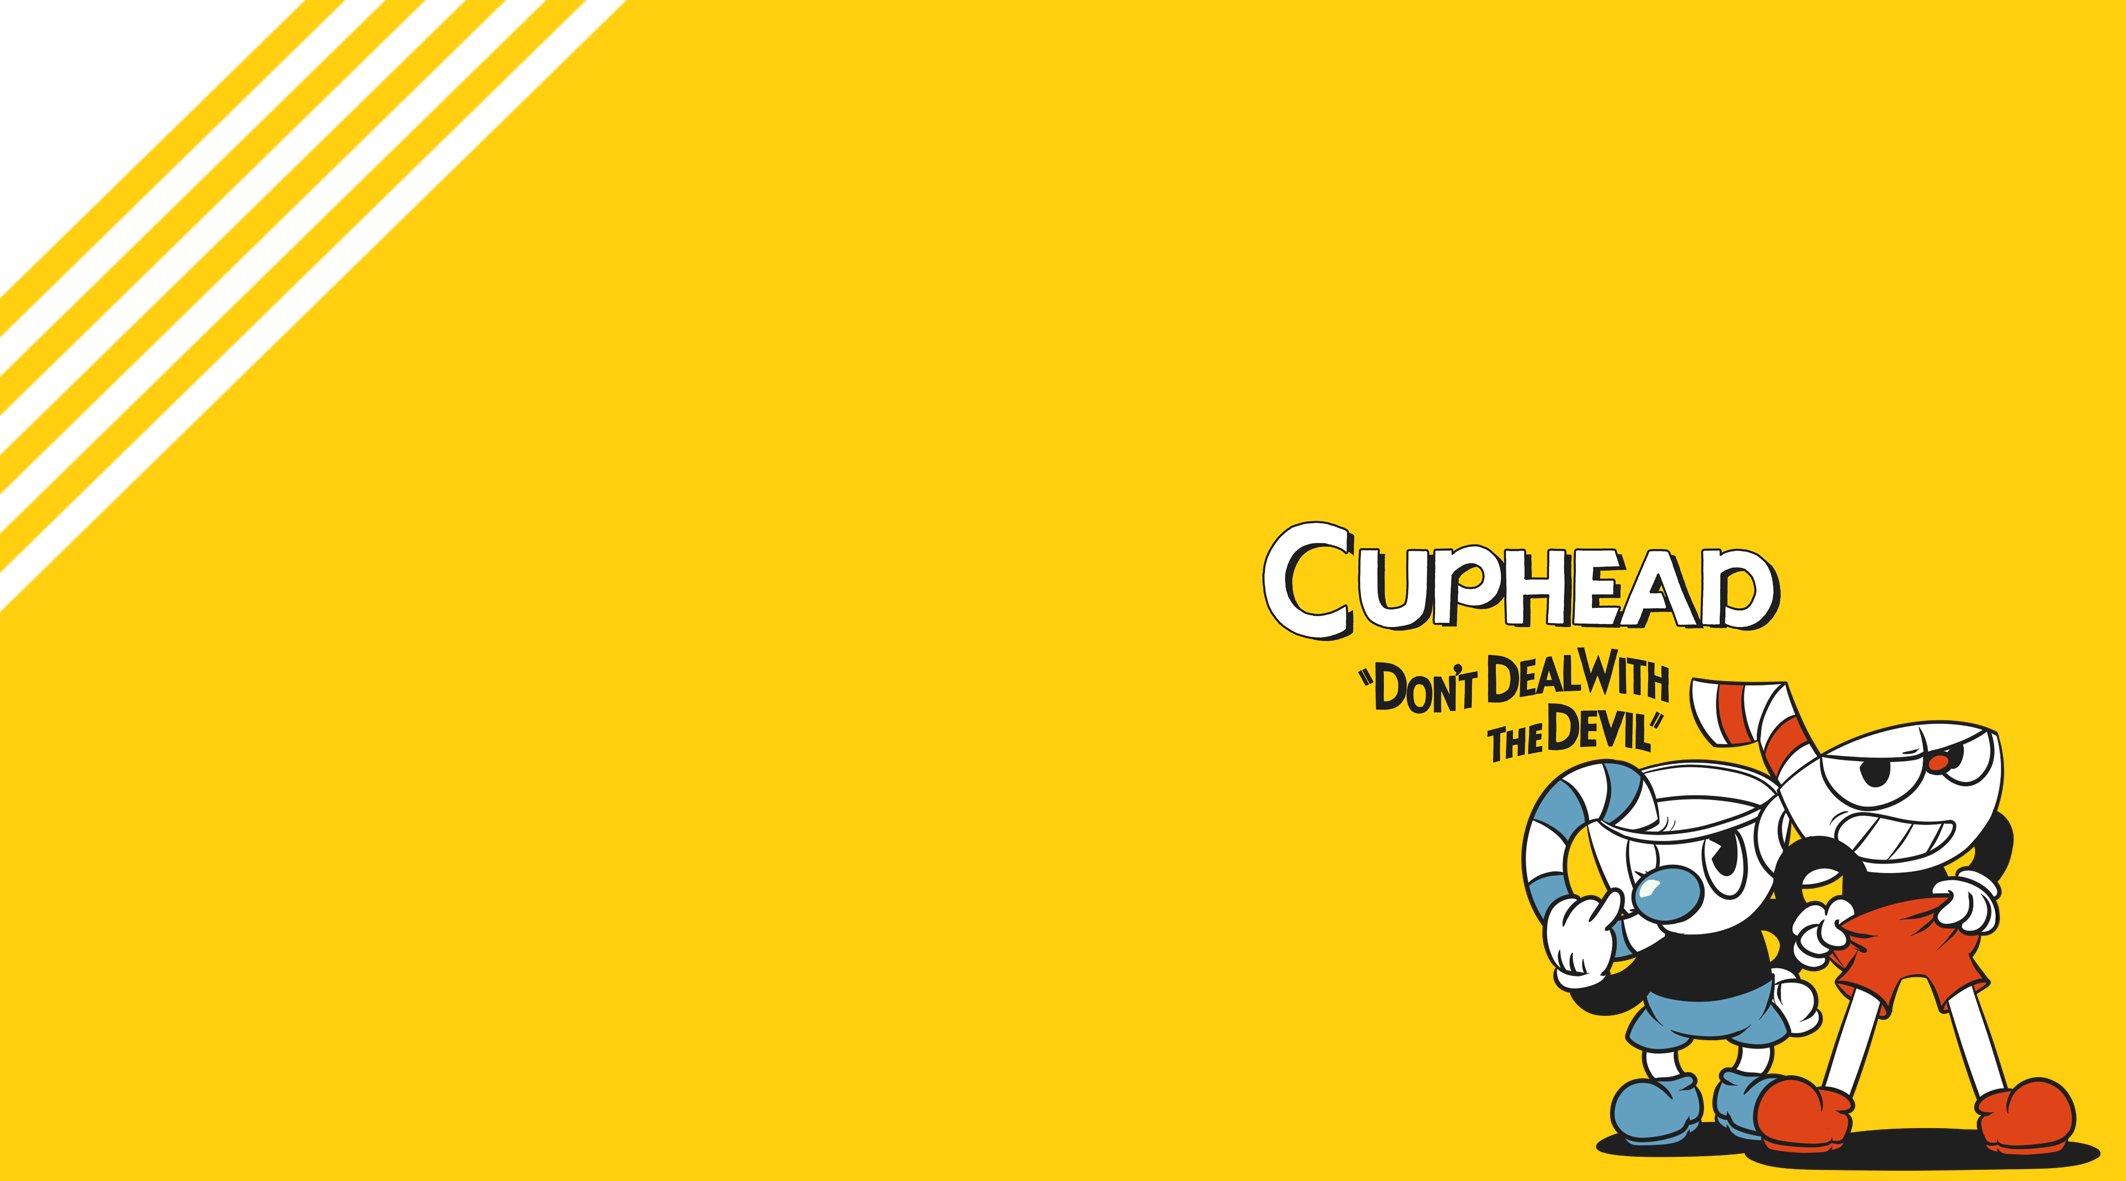 General 2126x1181 Cuphead Cuphead (Video Game) video game characters yellow background yellow Mugman video games